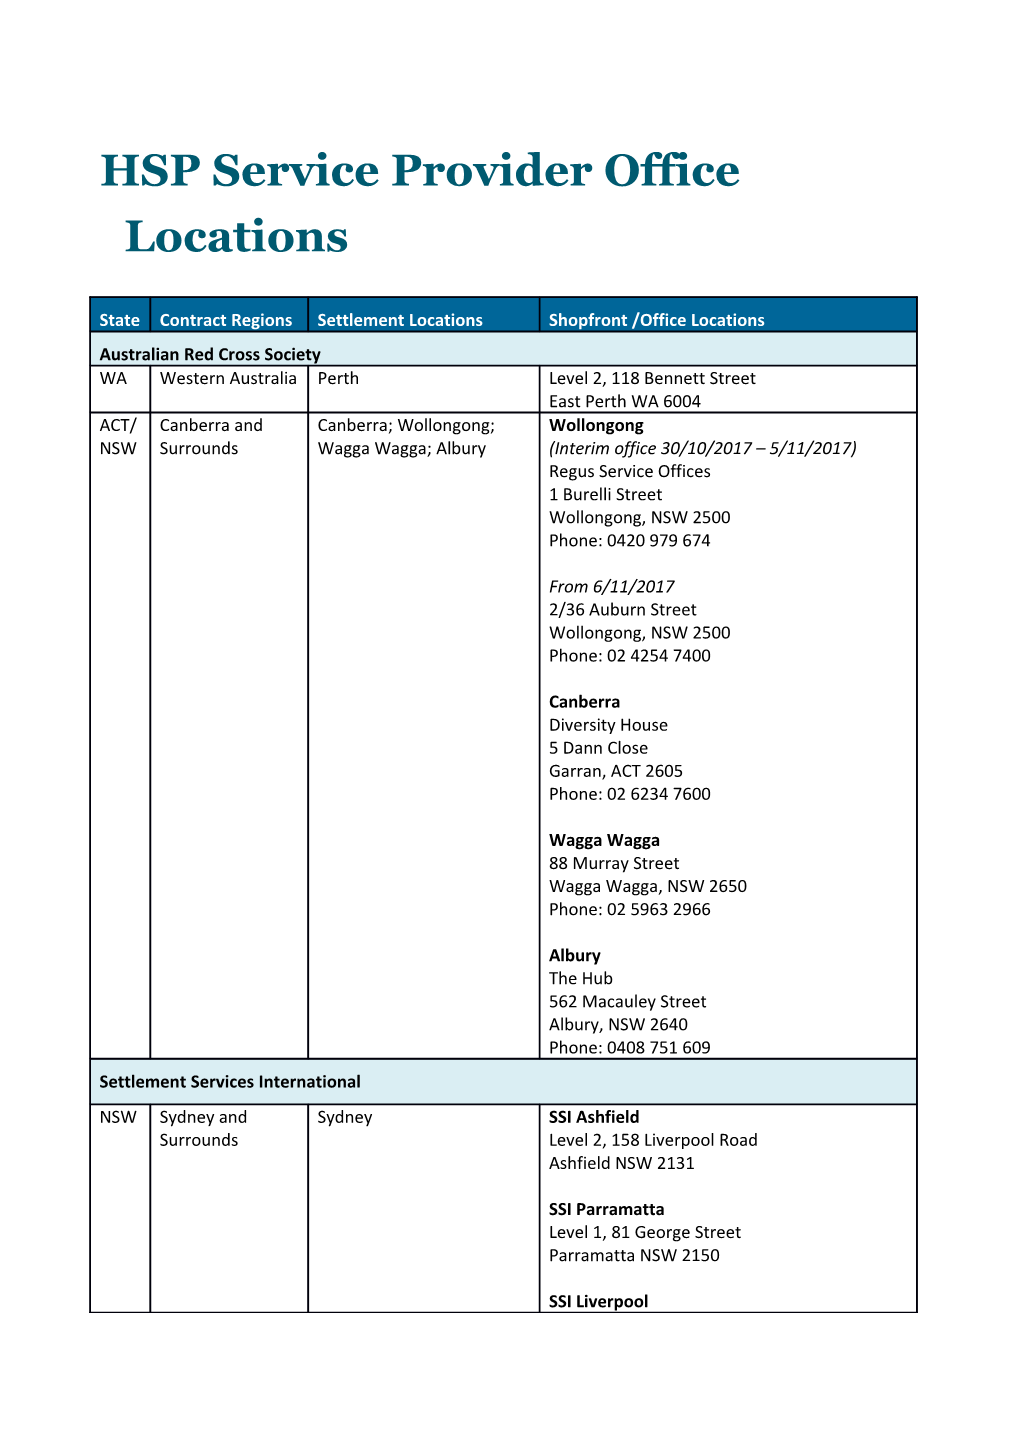 HSP Service Provider Office Locations